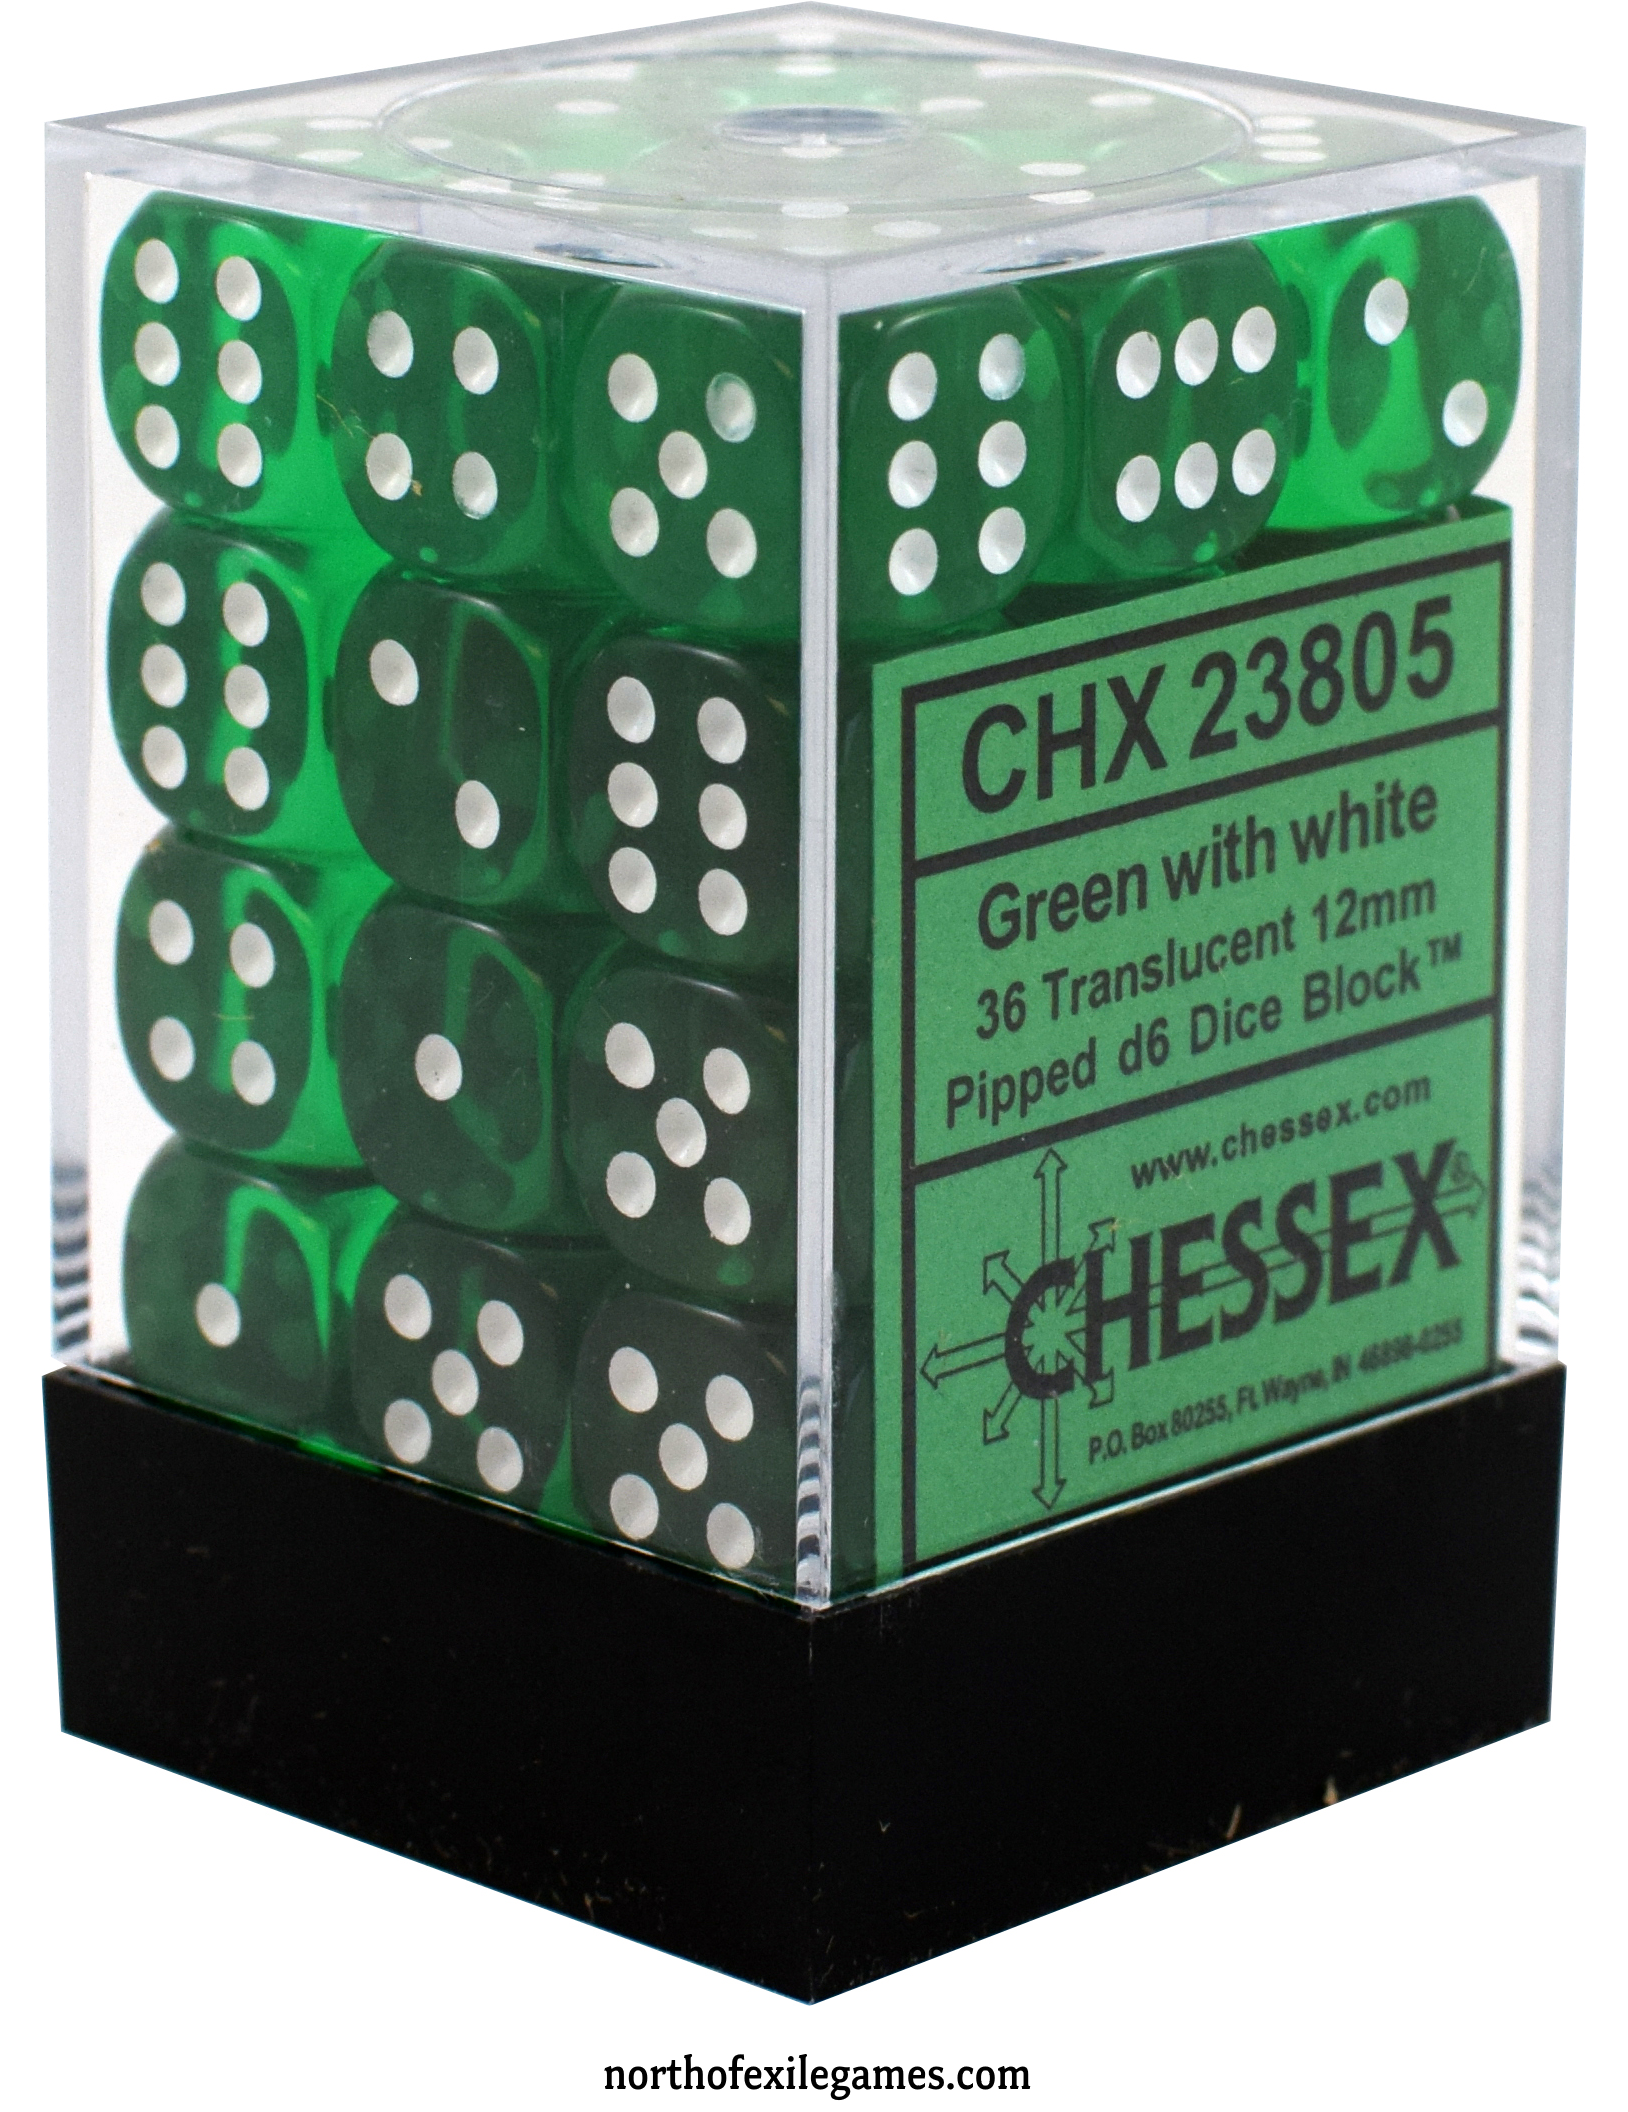 36 Green w/white Translucent 12mm D6 Dice Block - CHX 23805 | North of Exile Games